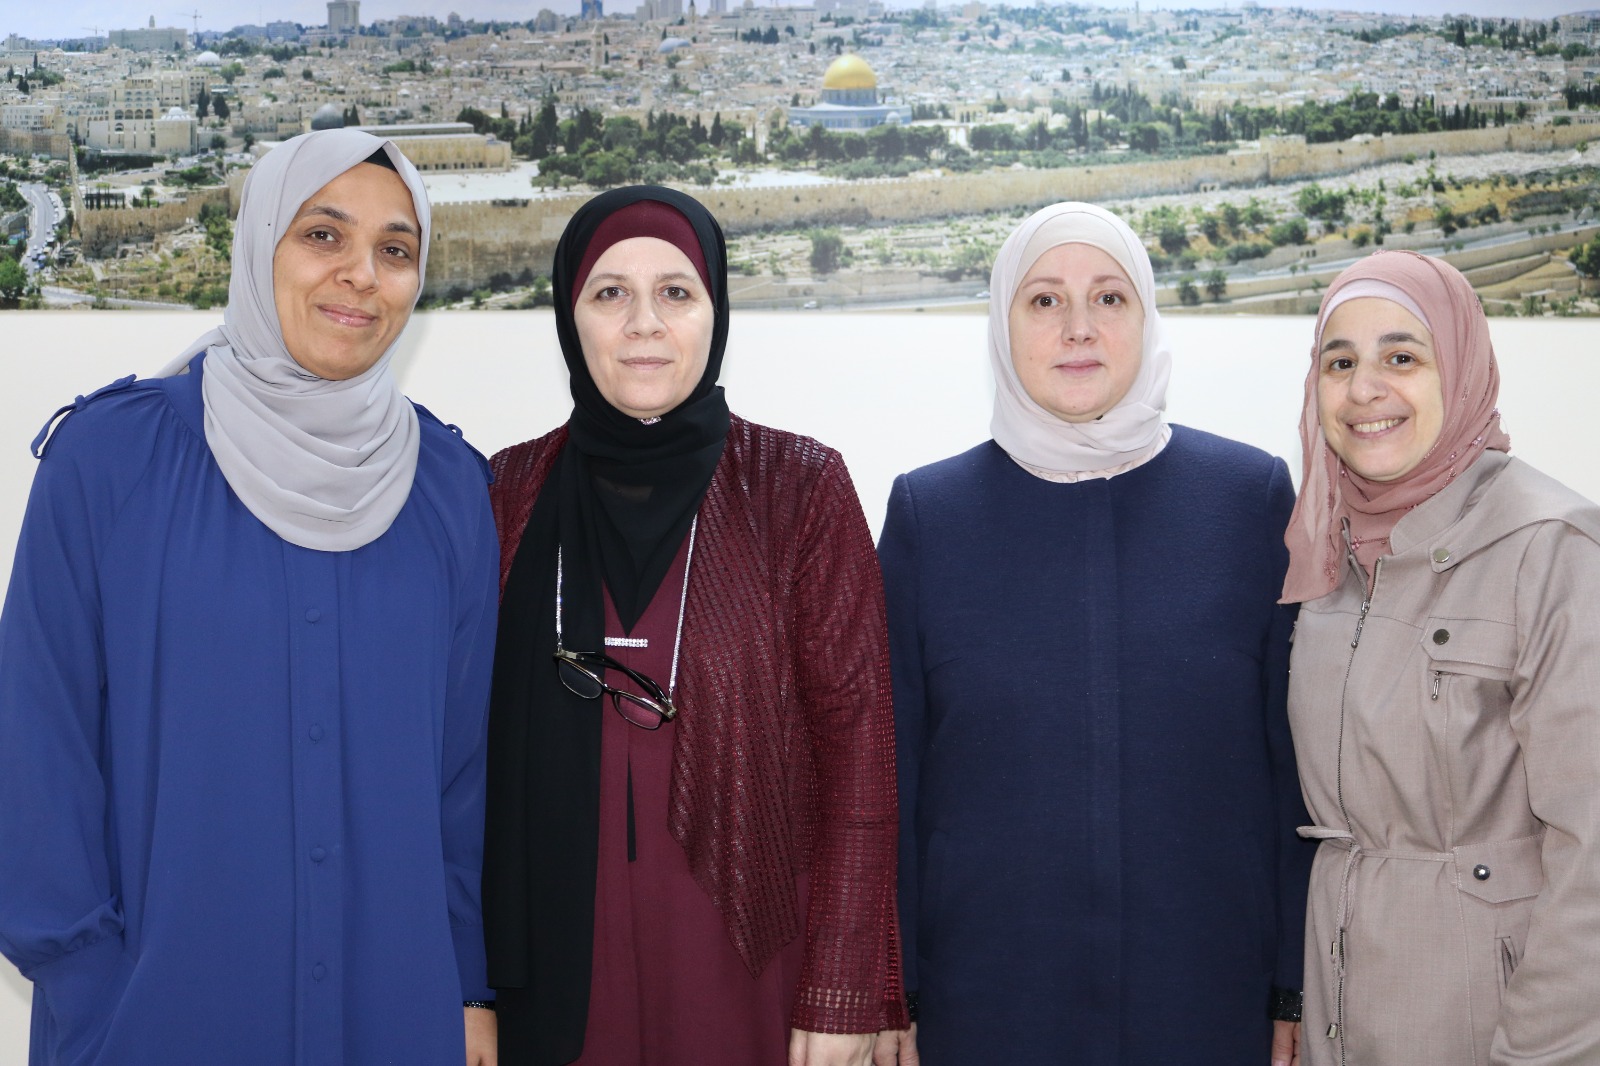 A delegation from Lebanon visited the headquarters of the Women’s Global Coalition for Quds and Palestine in Istanbul